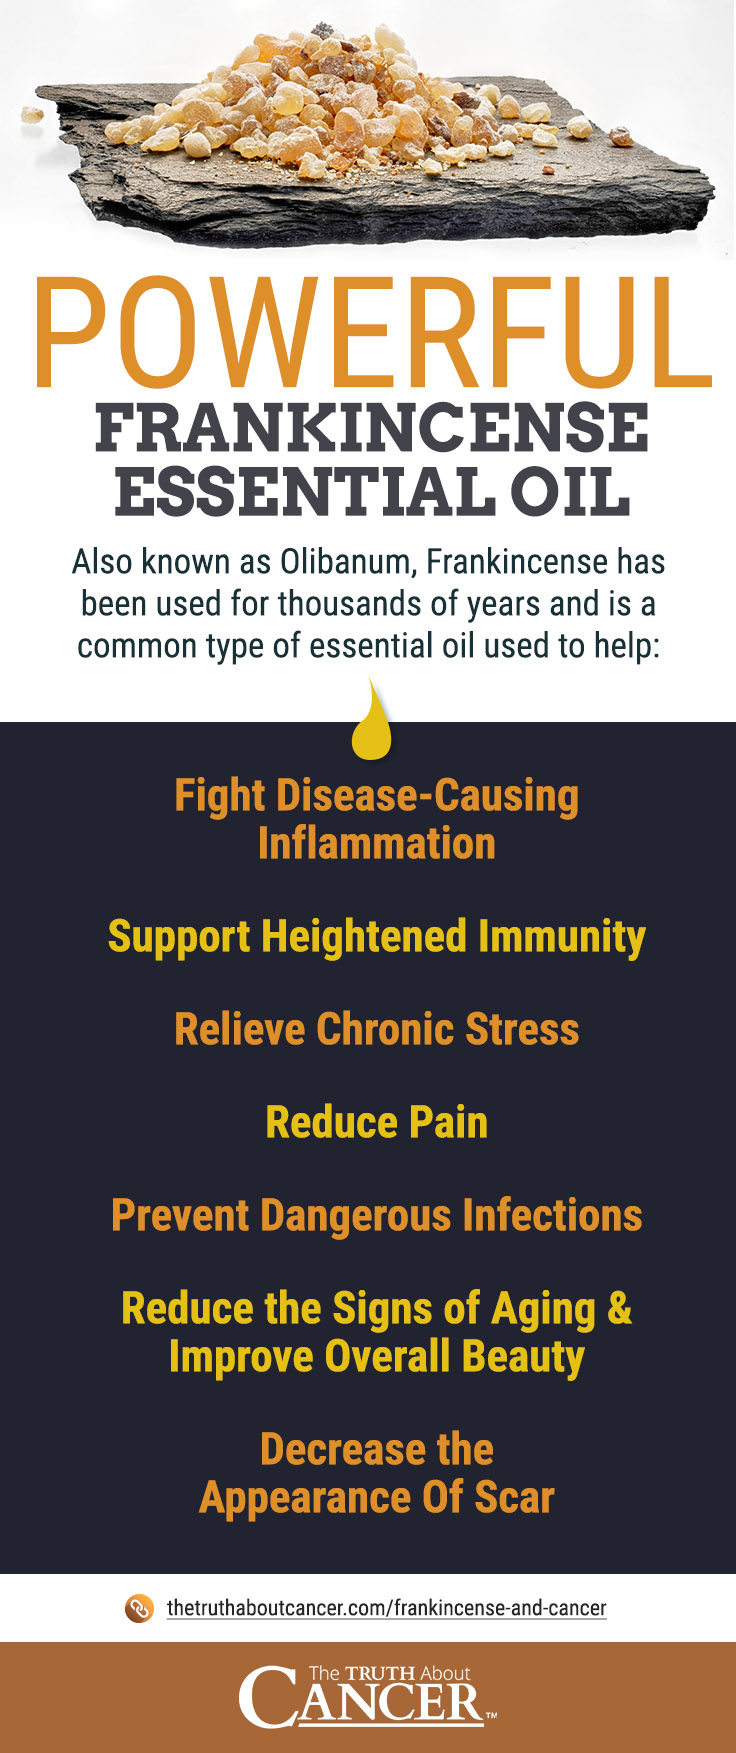 Frankincense and cancer benefits Infographic